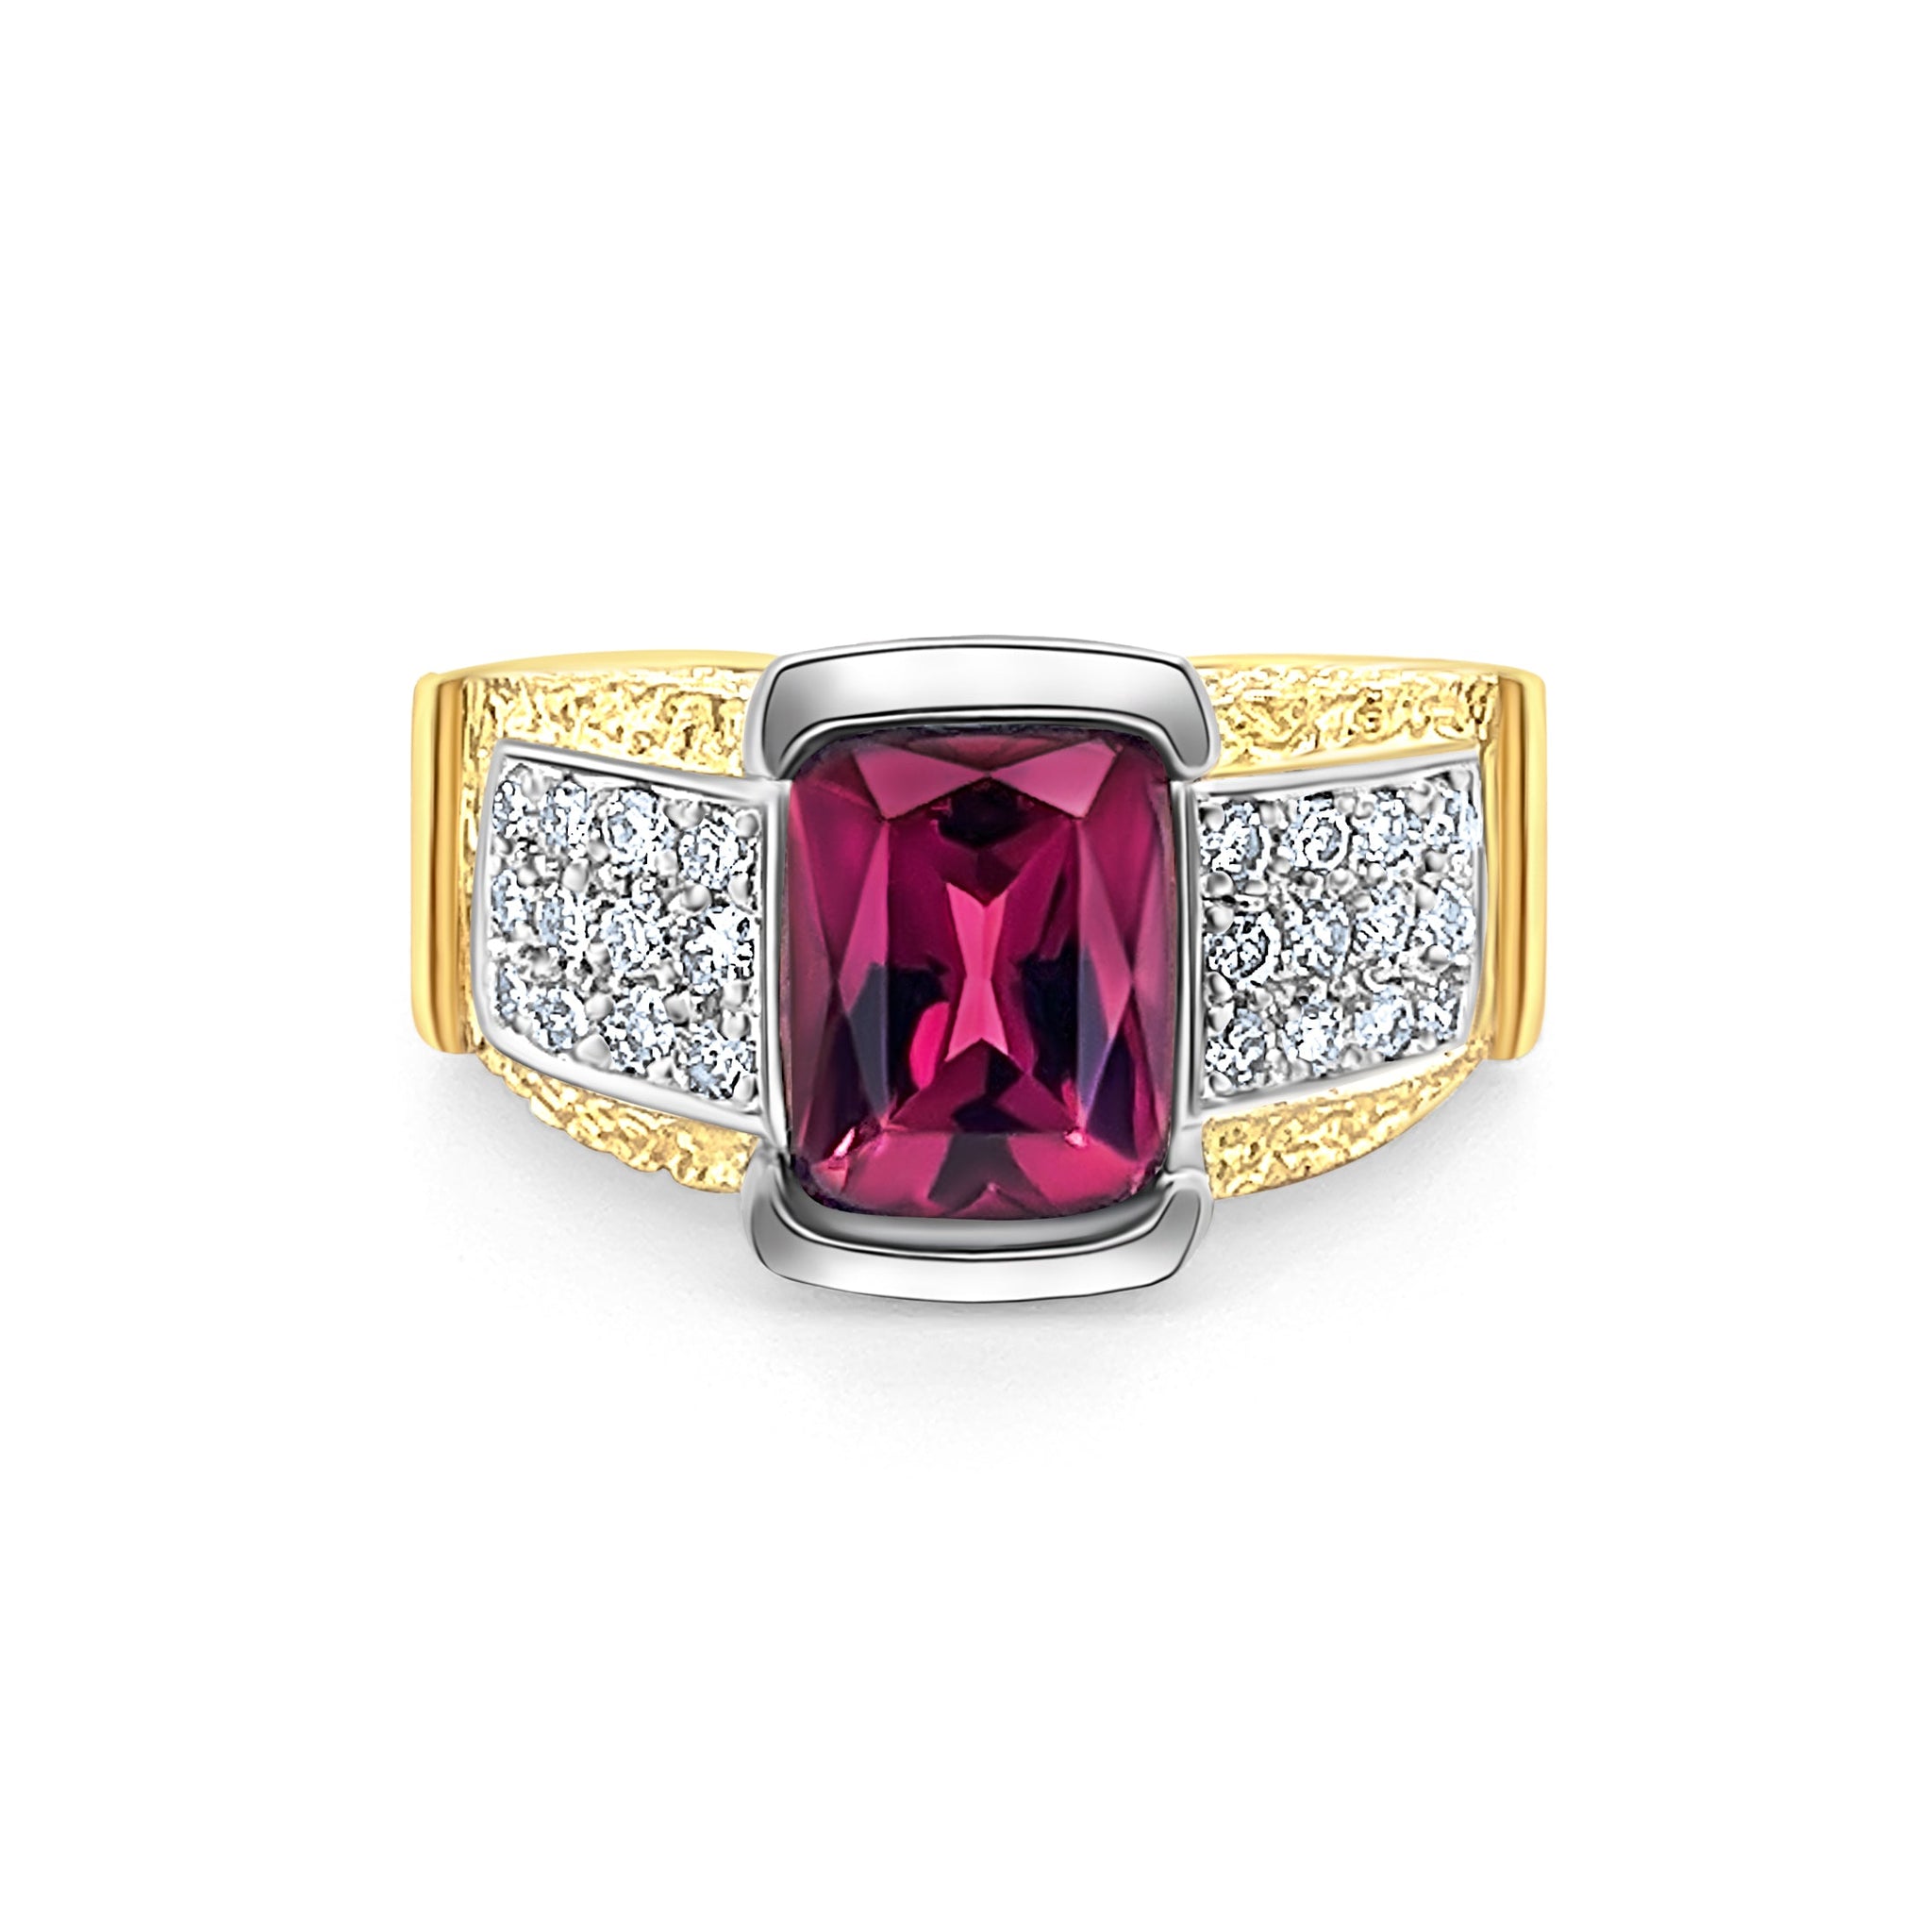 Vintage Radiant Cut 4.50 Carat Red Rubellite Tourmaline and Diamond Ring in Platinum and 18K Gold-Semi Precious Jewelry-ASSAY